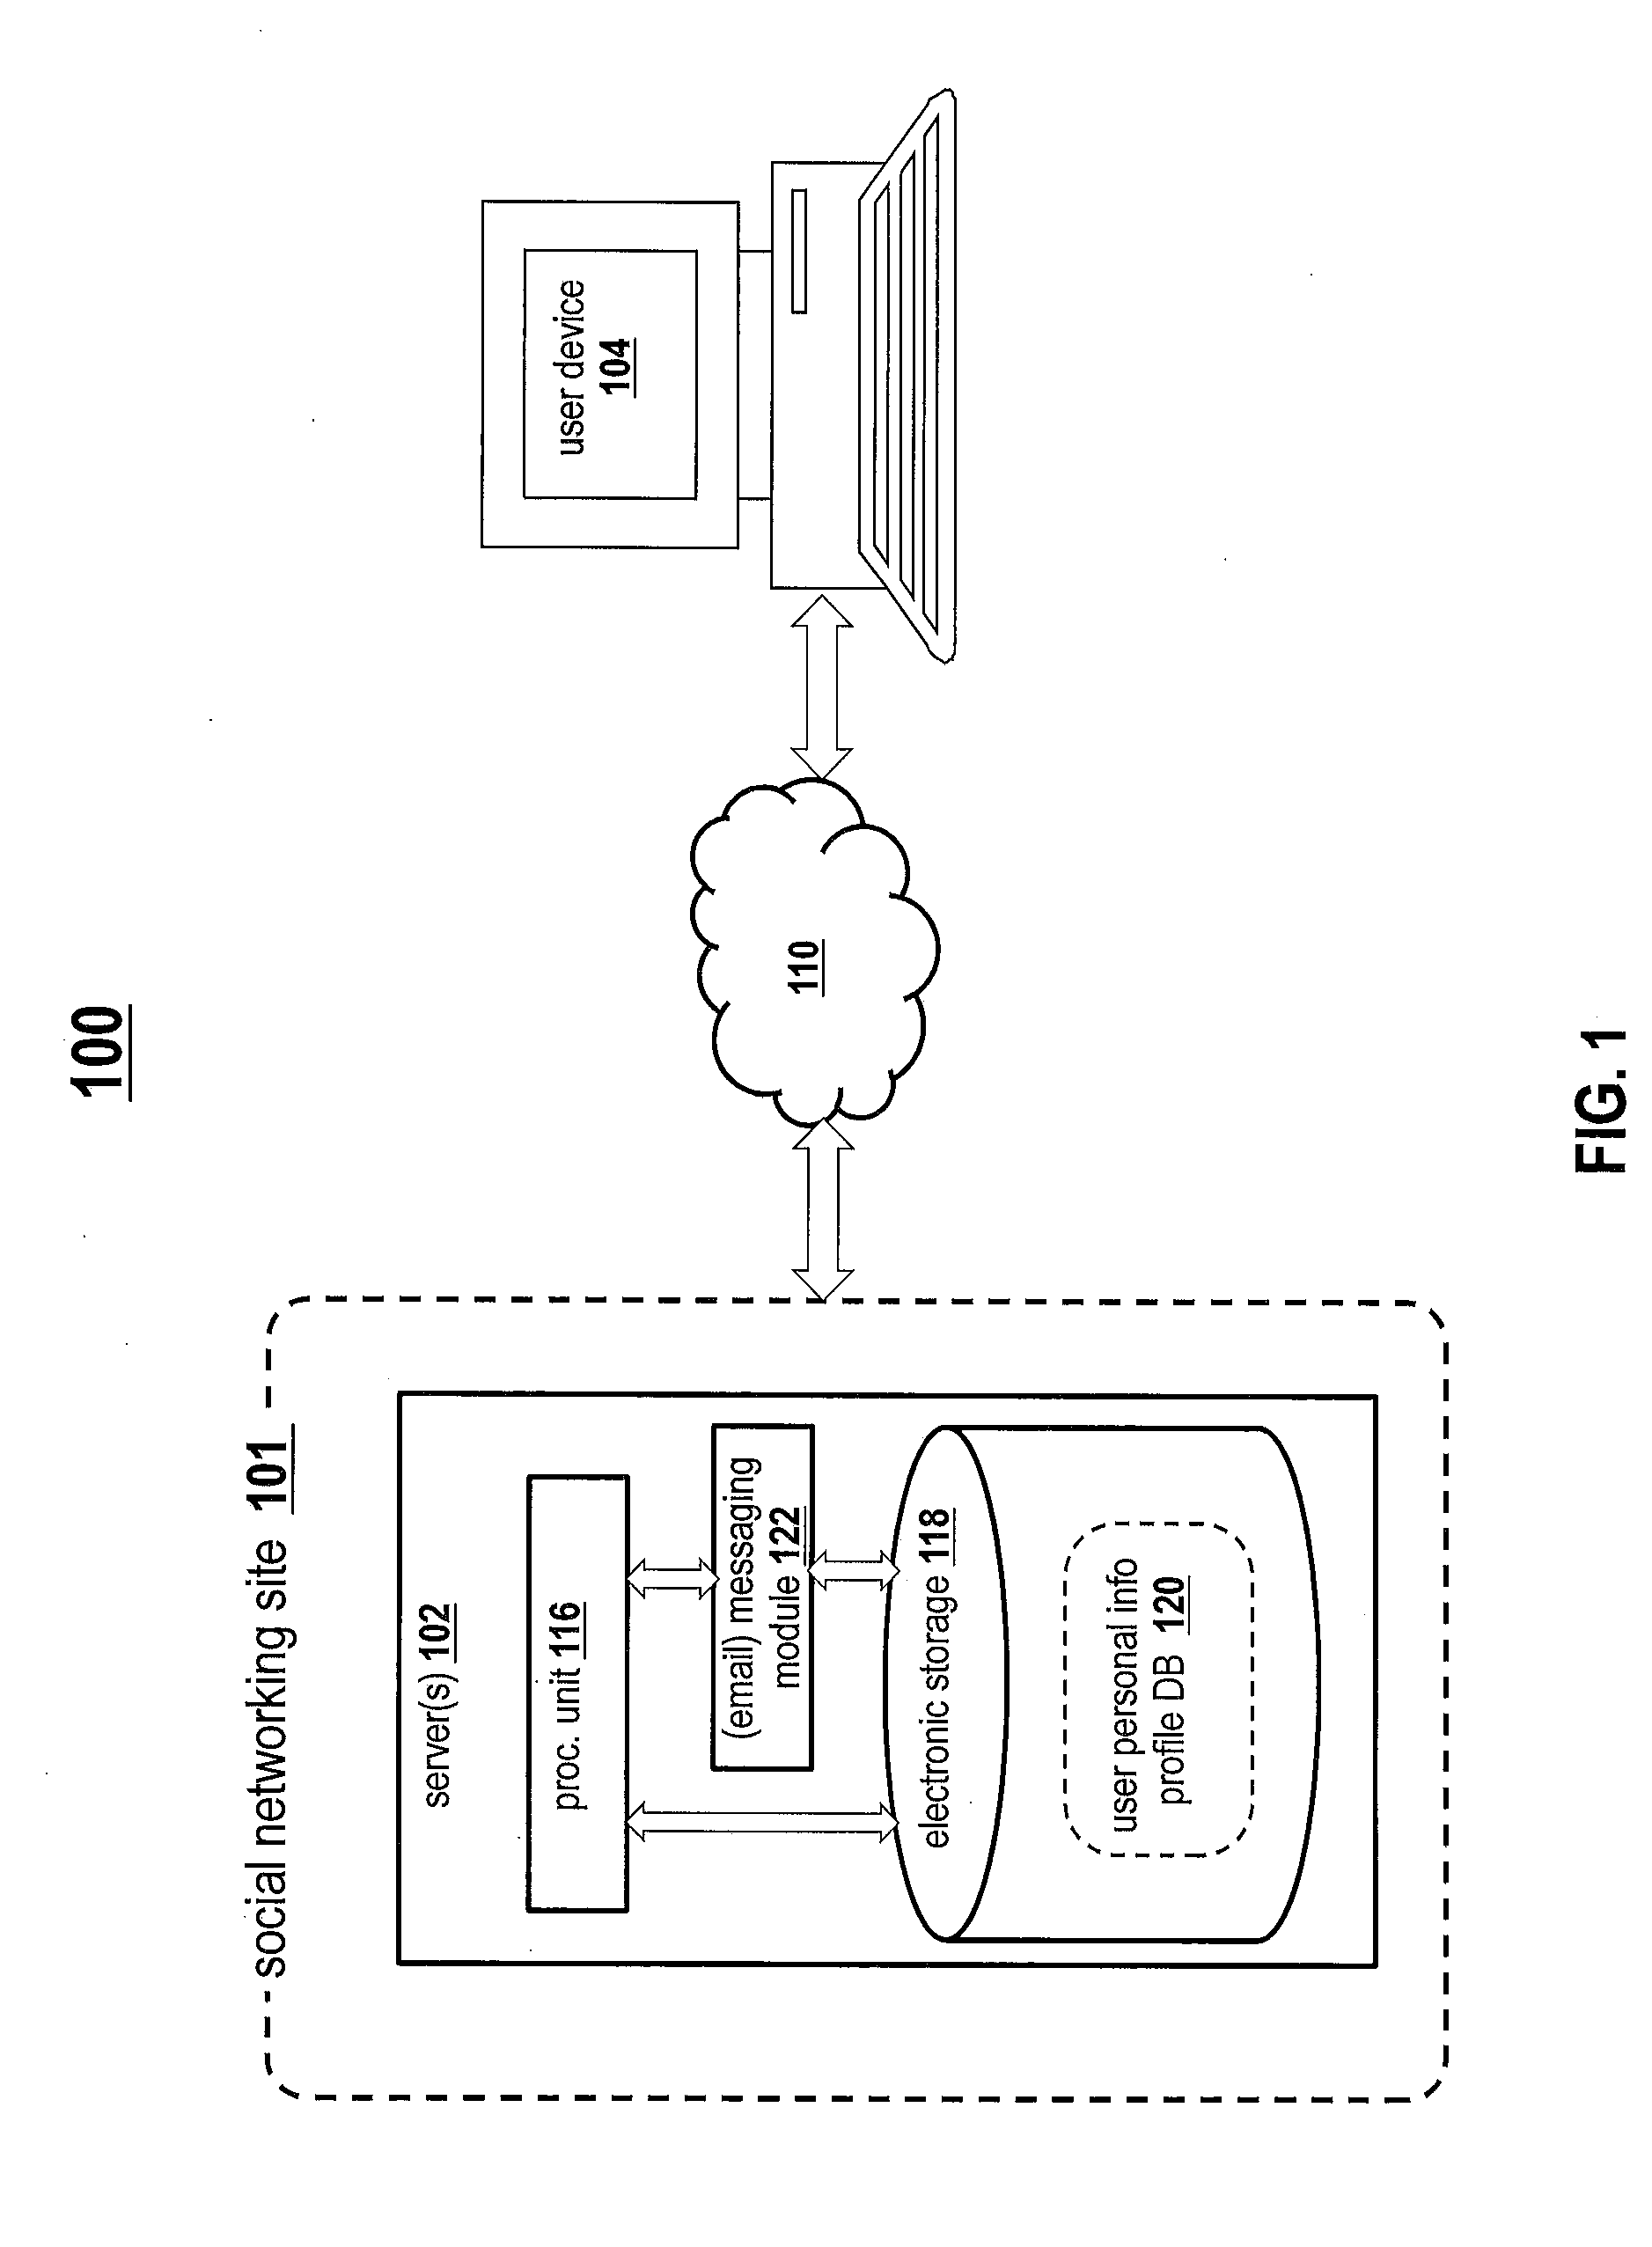 System and method for delivering certain work posted on a social network to a targeted audience